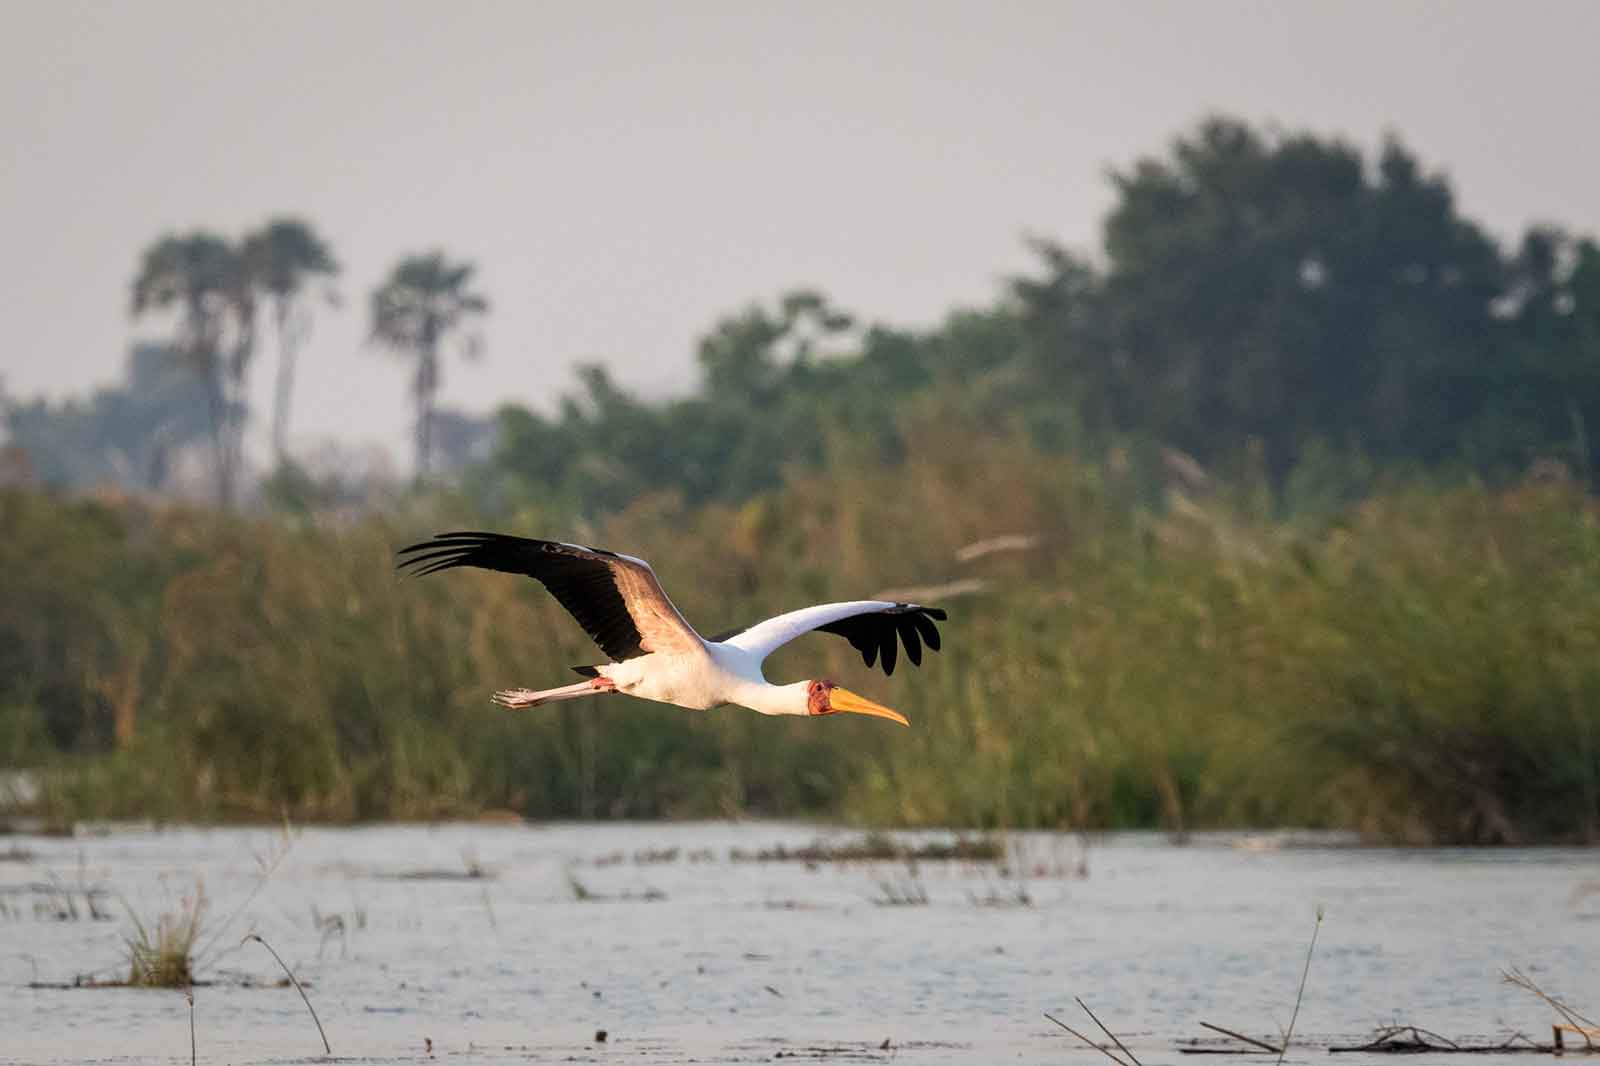 Mboma storks in the Delta